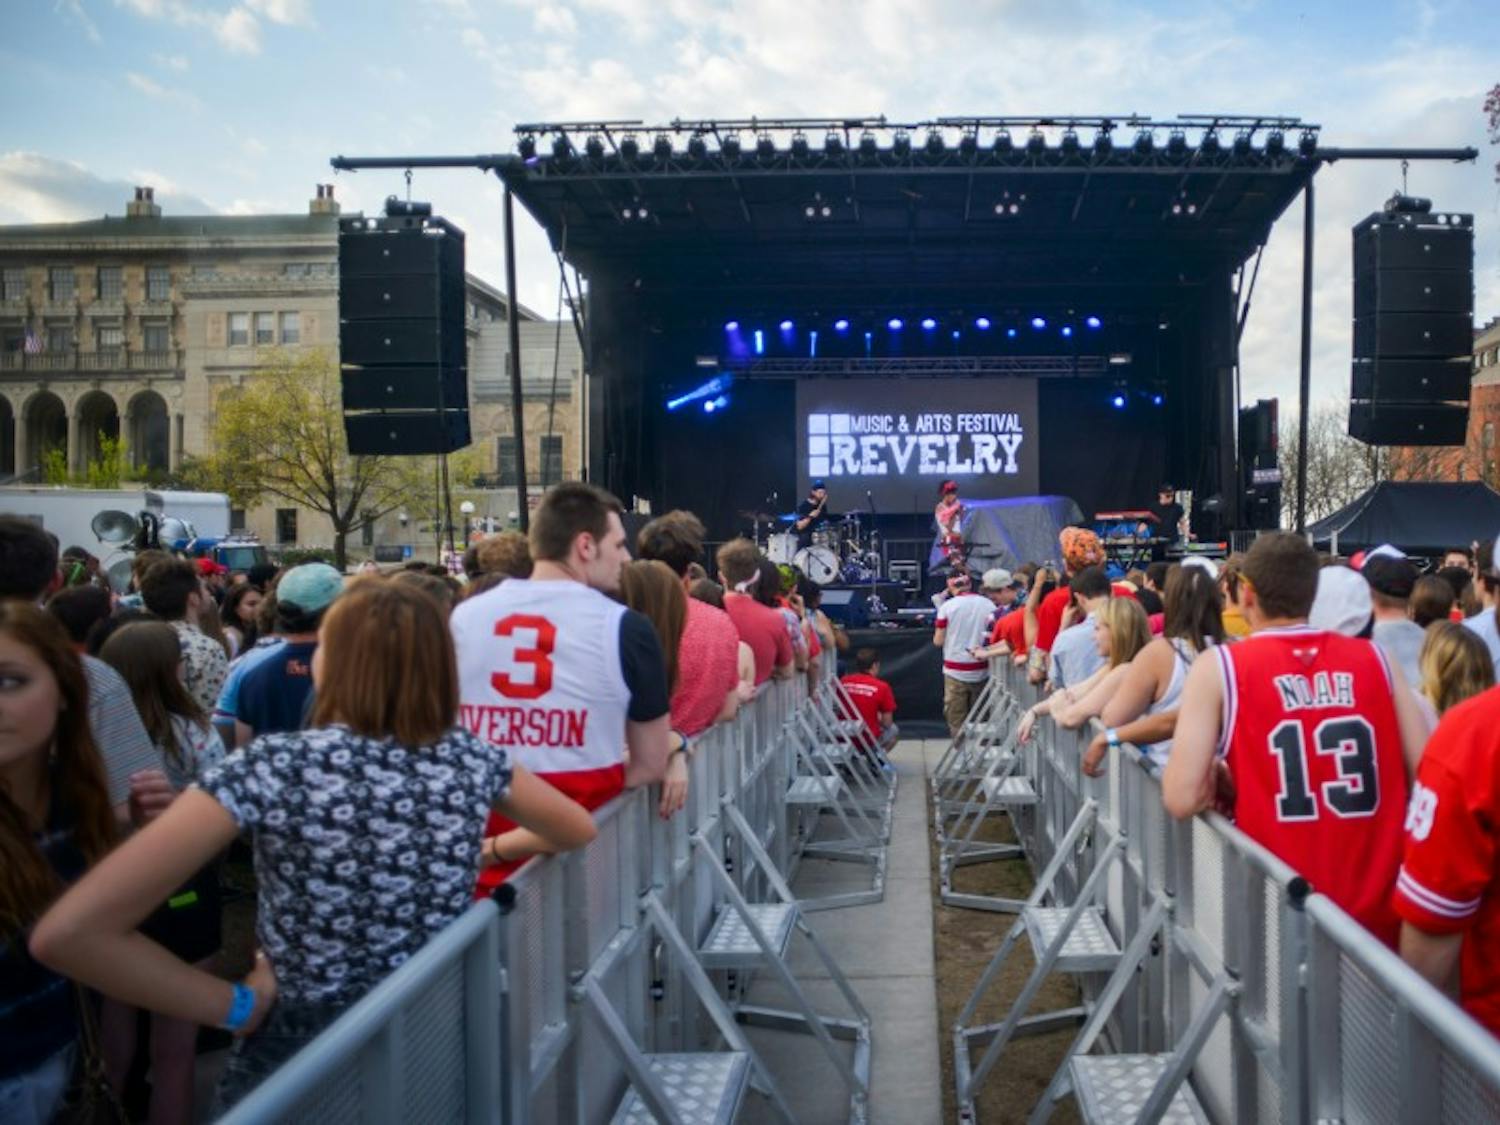 Due to budget cuts, Revelry will move to the Orpheum Theater this year.